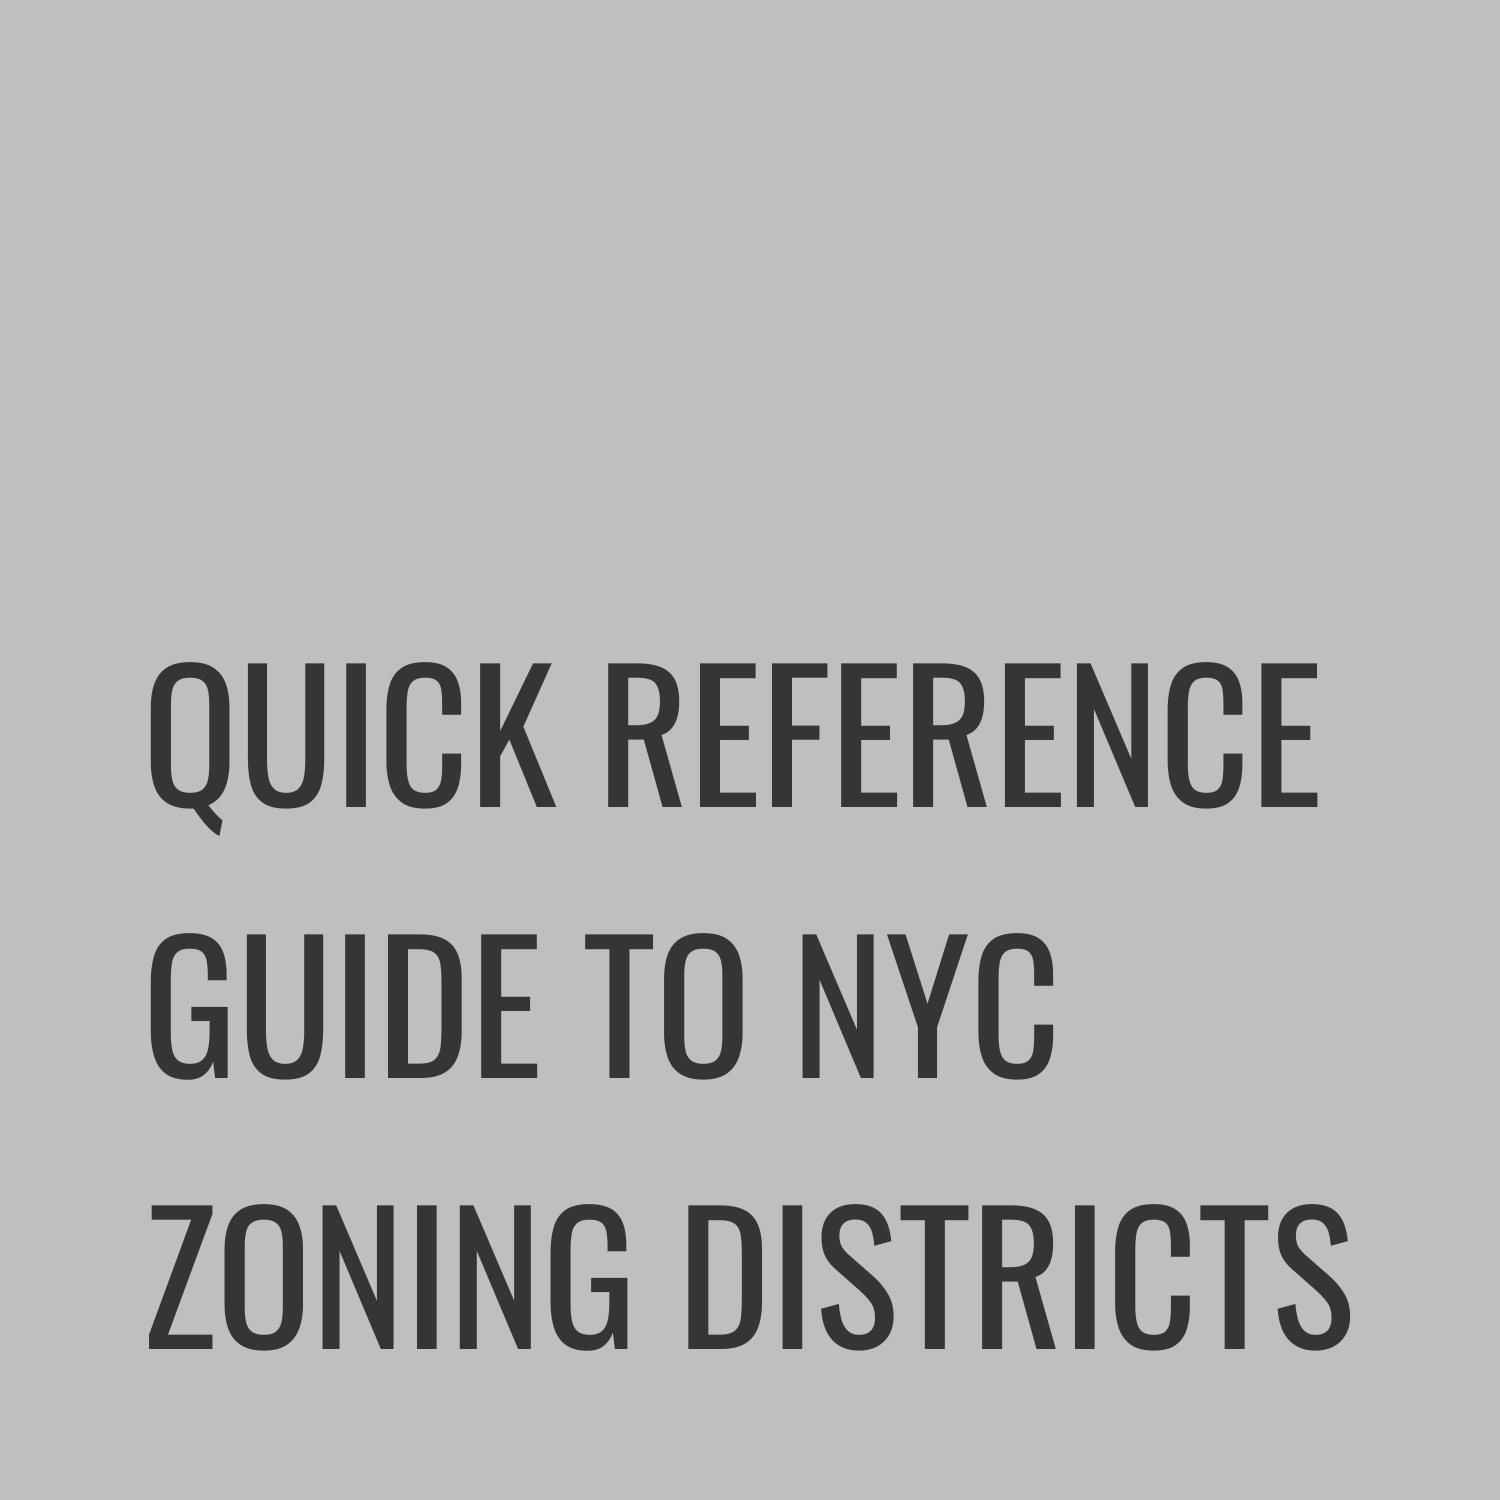 Quick Reference Guide to NYC Zoning Districts